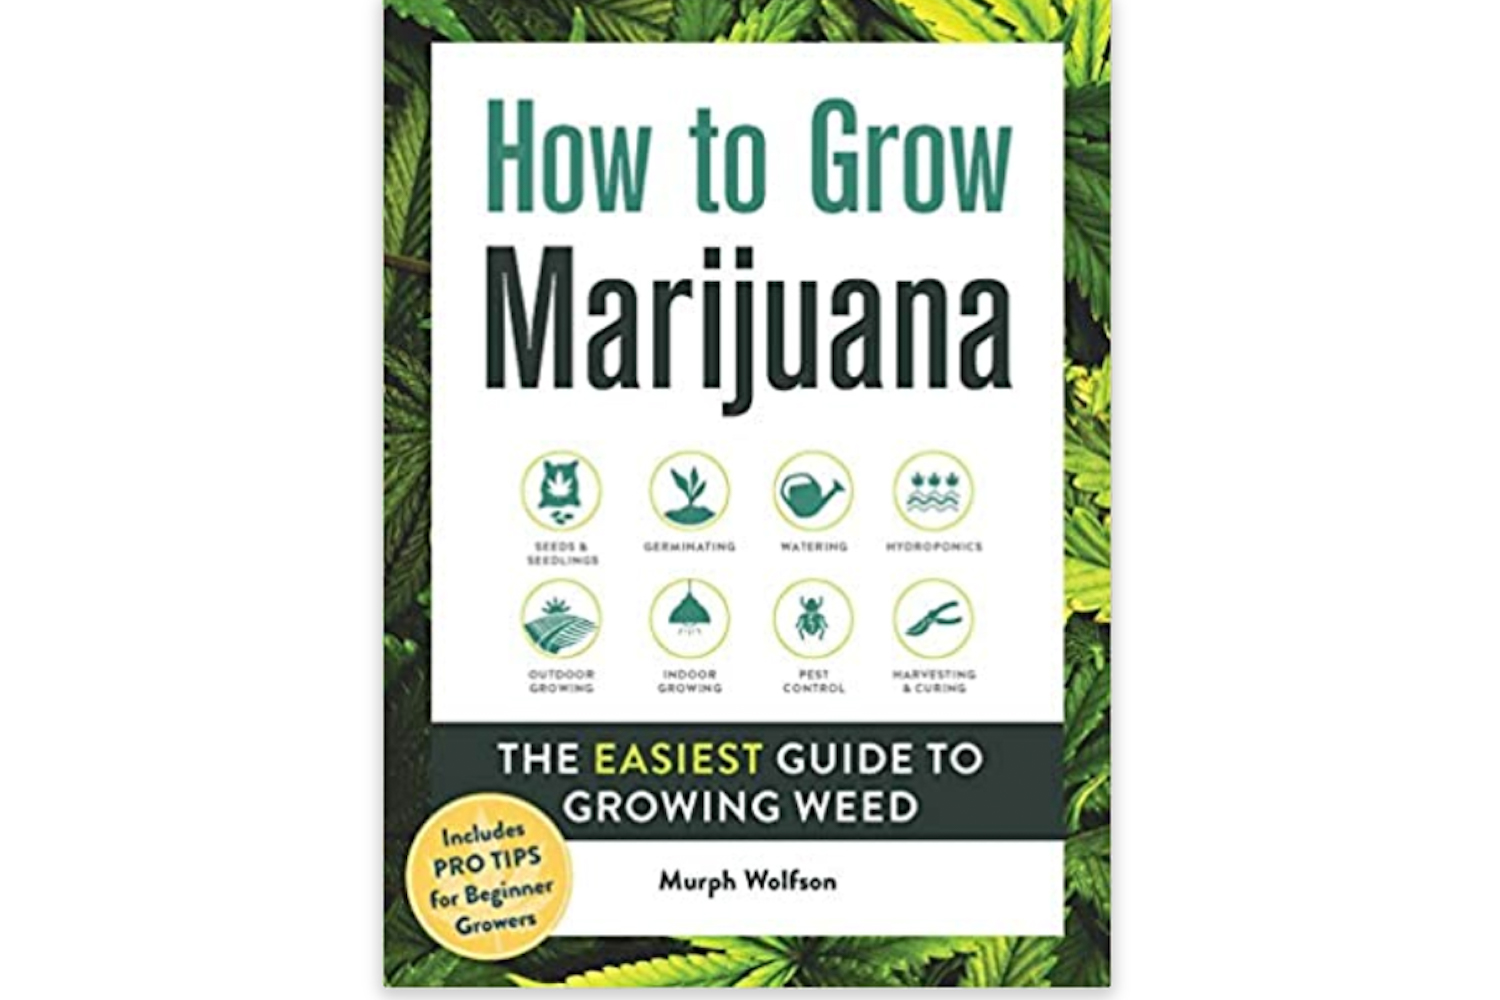 cannabis grow bible new edition vs first edition